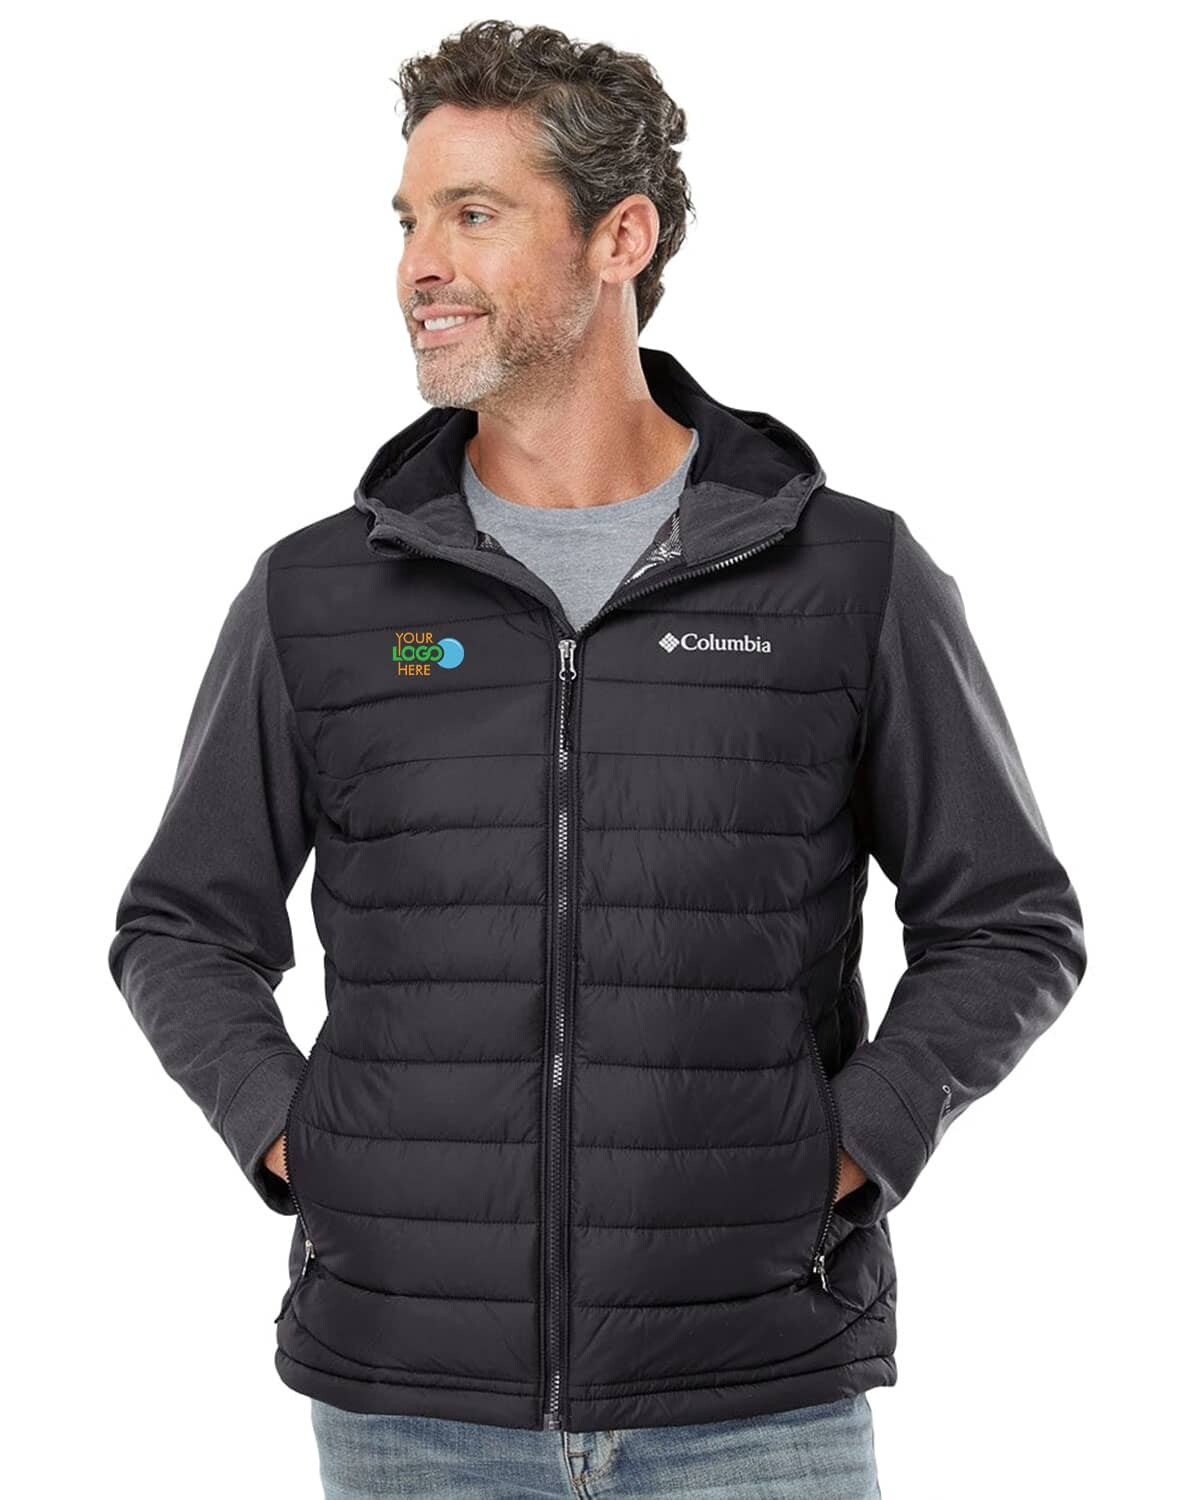 Custom Columbia 186463 Powder Lite Hybrid Jacket for business Apparel, promotional Product